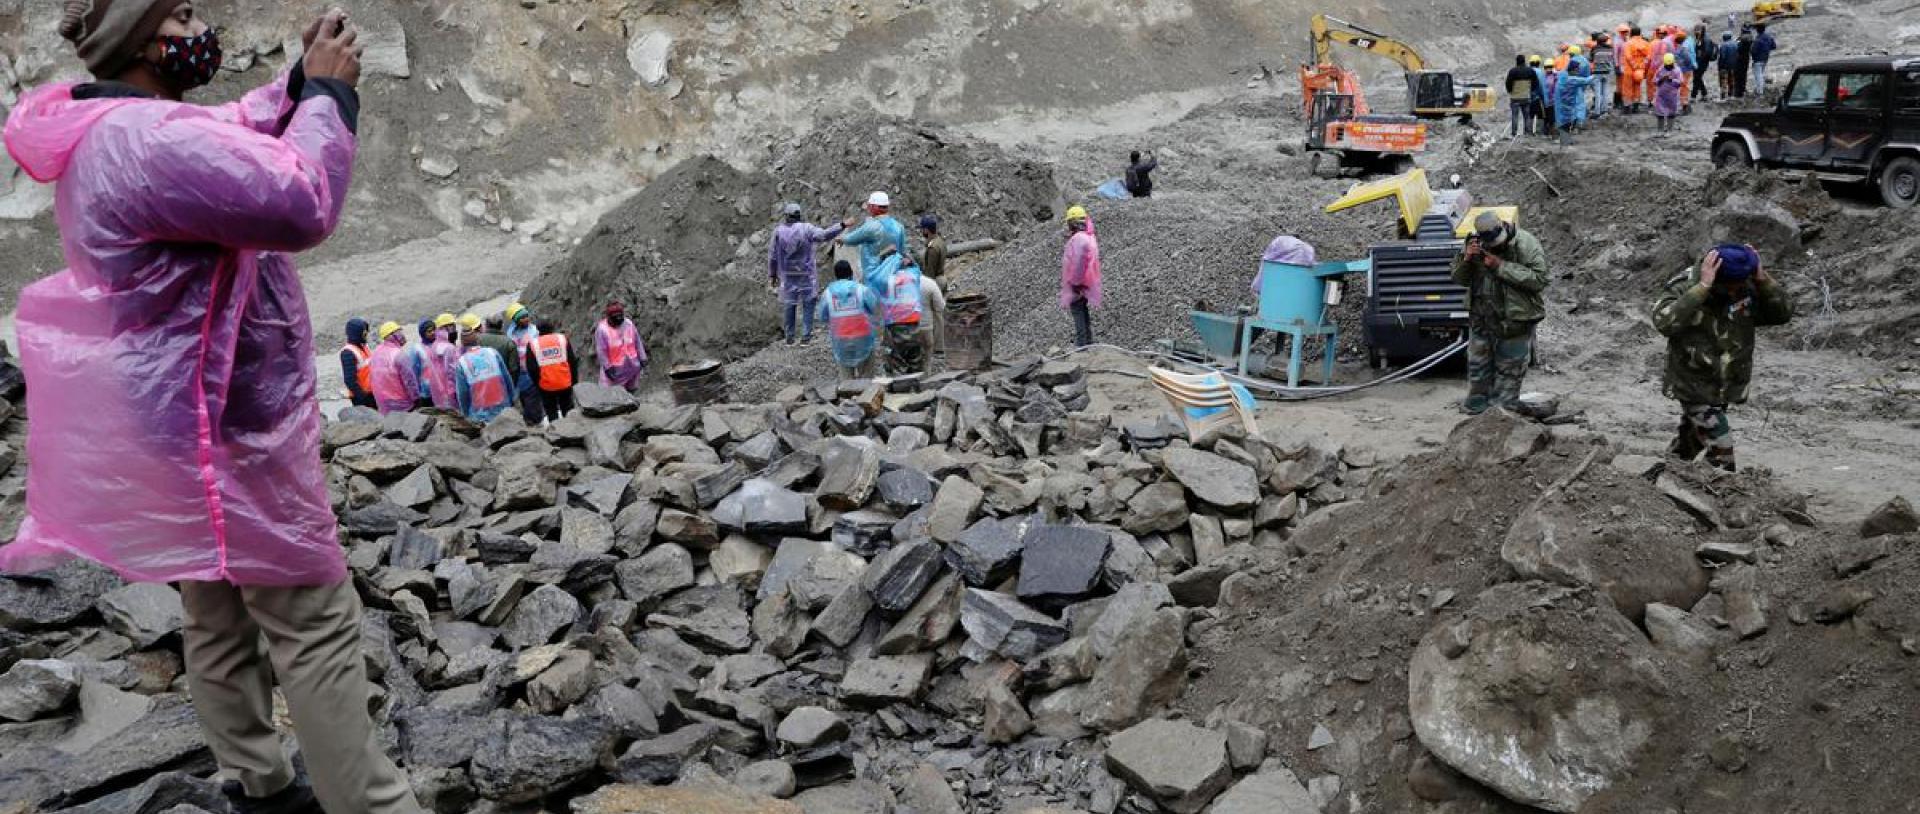 The site of a destroyed hydroelectric power station after a flash flood in Uttarakhand. | Anshree Fadnavis / Reuters